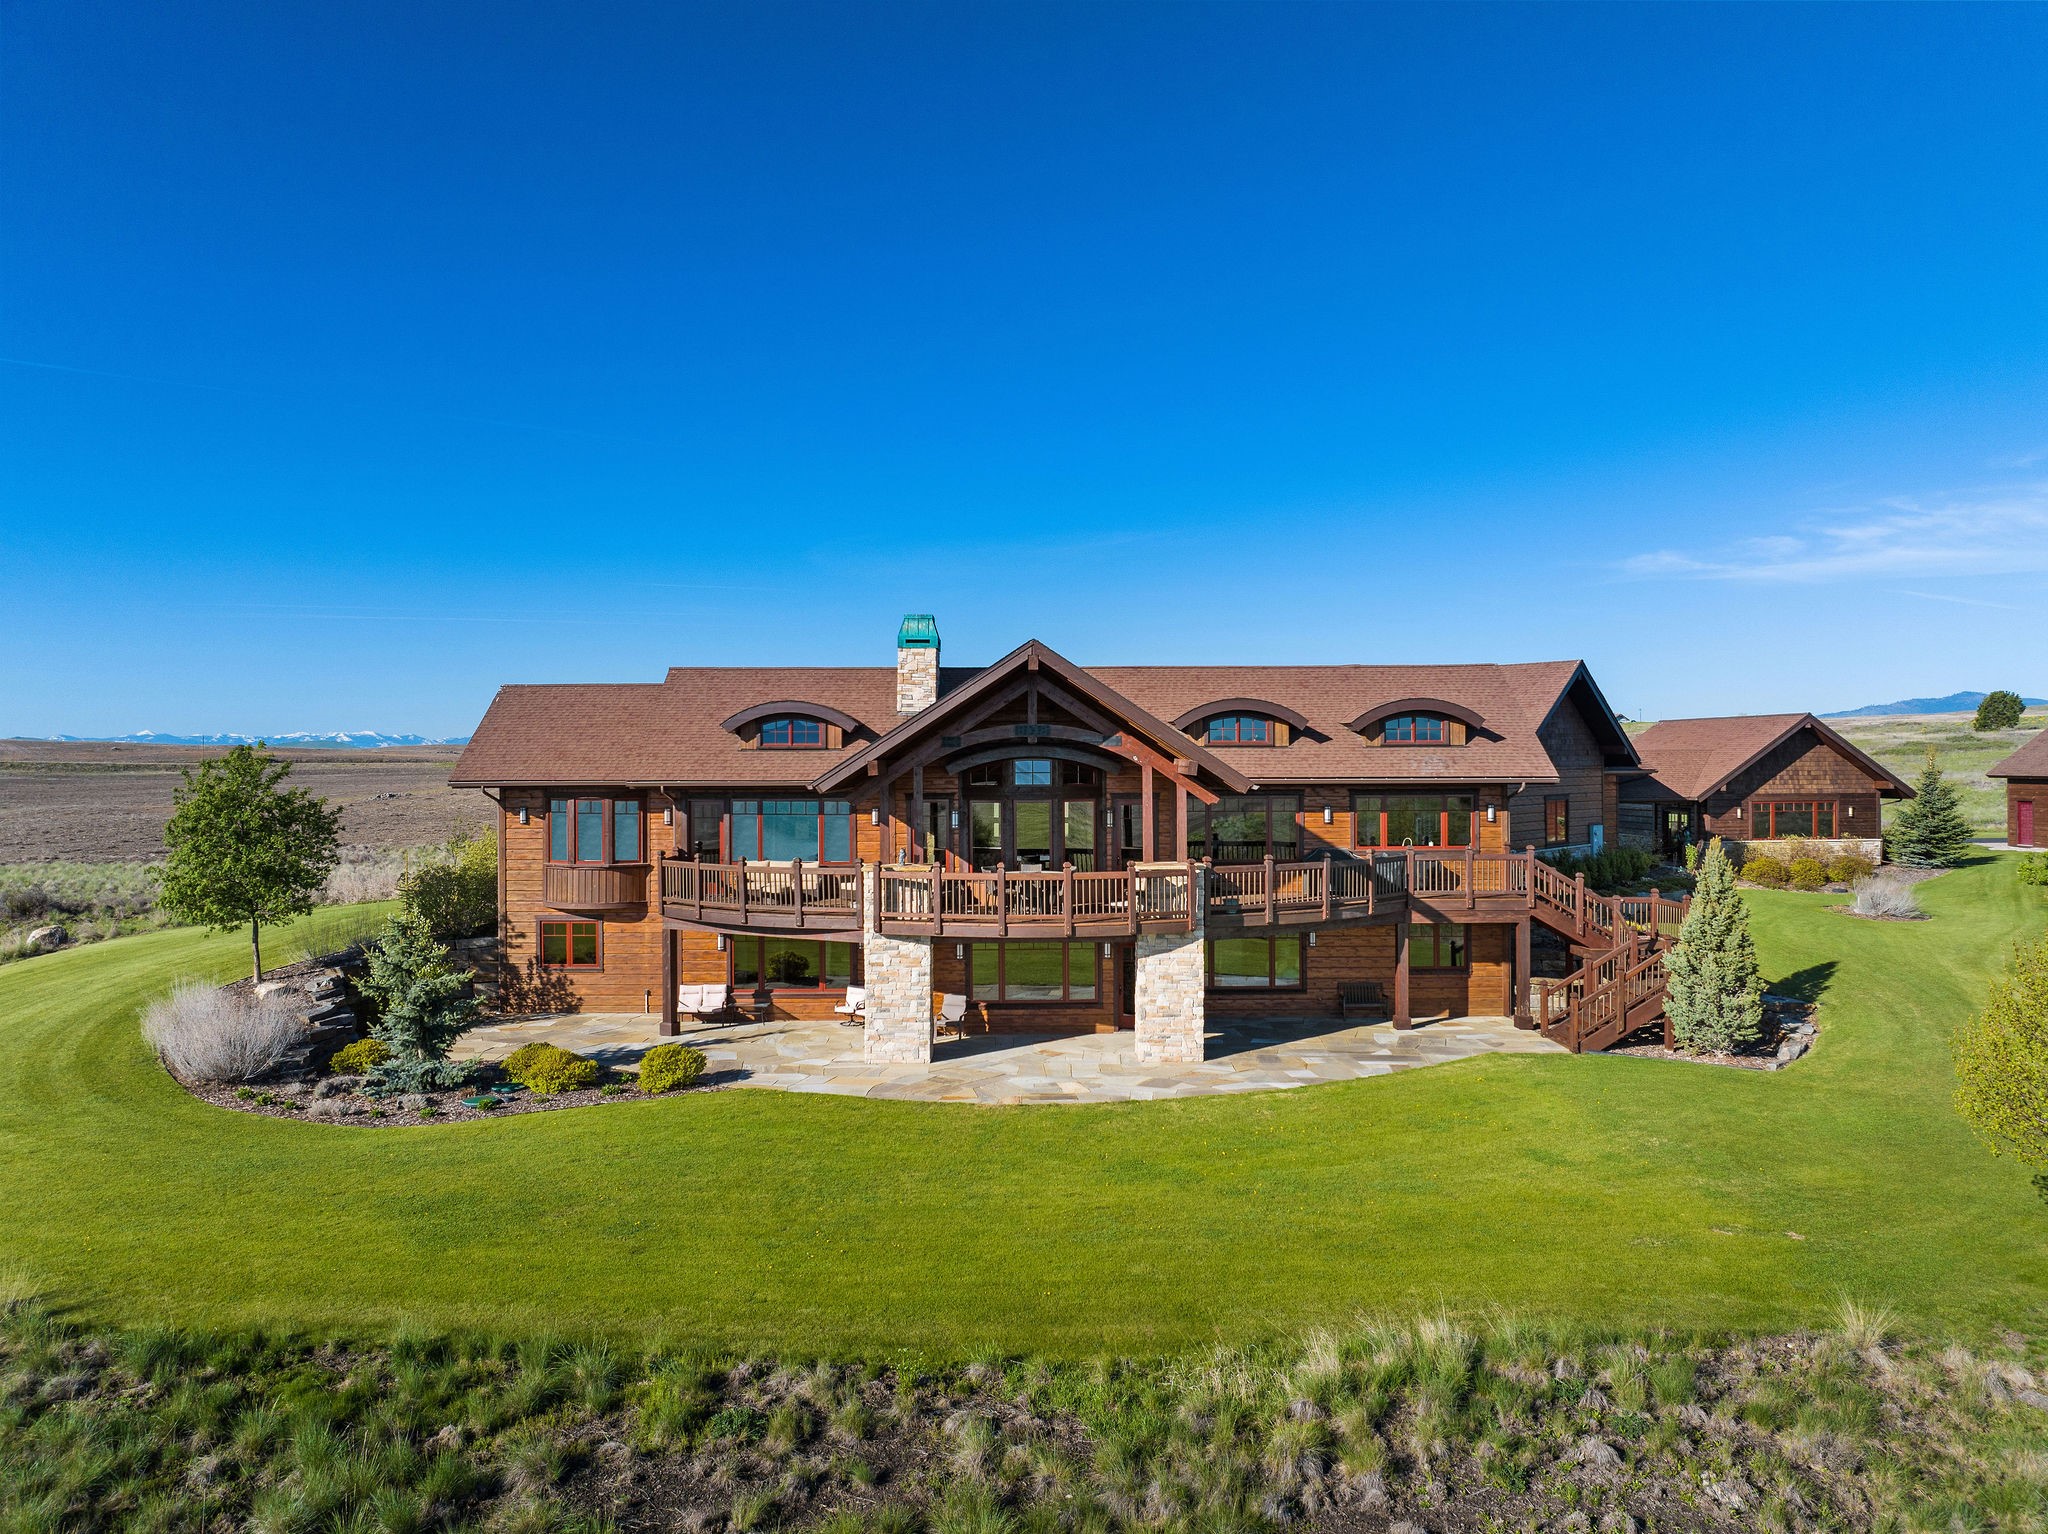 Exquisite custom craftsmanship meets spectacular Mission Mountain and Flathead Lake views at this 4BD/4BA 4,941 SF home on 10.03 acres. With a main level primary suite, this home showcases a gorgeous fusion of woodwork and upscale finishes, which include natural hickory wood and travertine tile floor, hand-picked Chief Cliff Rock on both interior fire places and exterior columns, knotty alder doors & trim, granite countertops, T&G pine ceiling, lower-level in-floor radiant heat, and handblown glass lighting from Hubbardton Forge. Step outside the main level to the covered deck, or the lower-level walkout to the covered patio for endless entertainment possibilities. Walk through the covered breezeway to access the 30x24 heated shop, while a 30x40 barn, added in 2020, further enhances the property’s functionality.  Flathead Lake recreation and amenities are just minutes away! See Feature Sheet in docs. Call Jennifer Shelley at 406.249.8929 or your real estate professional.